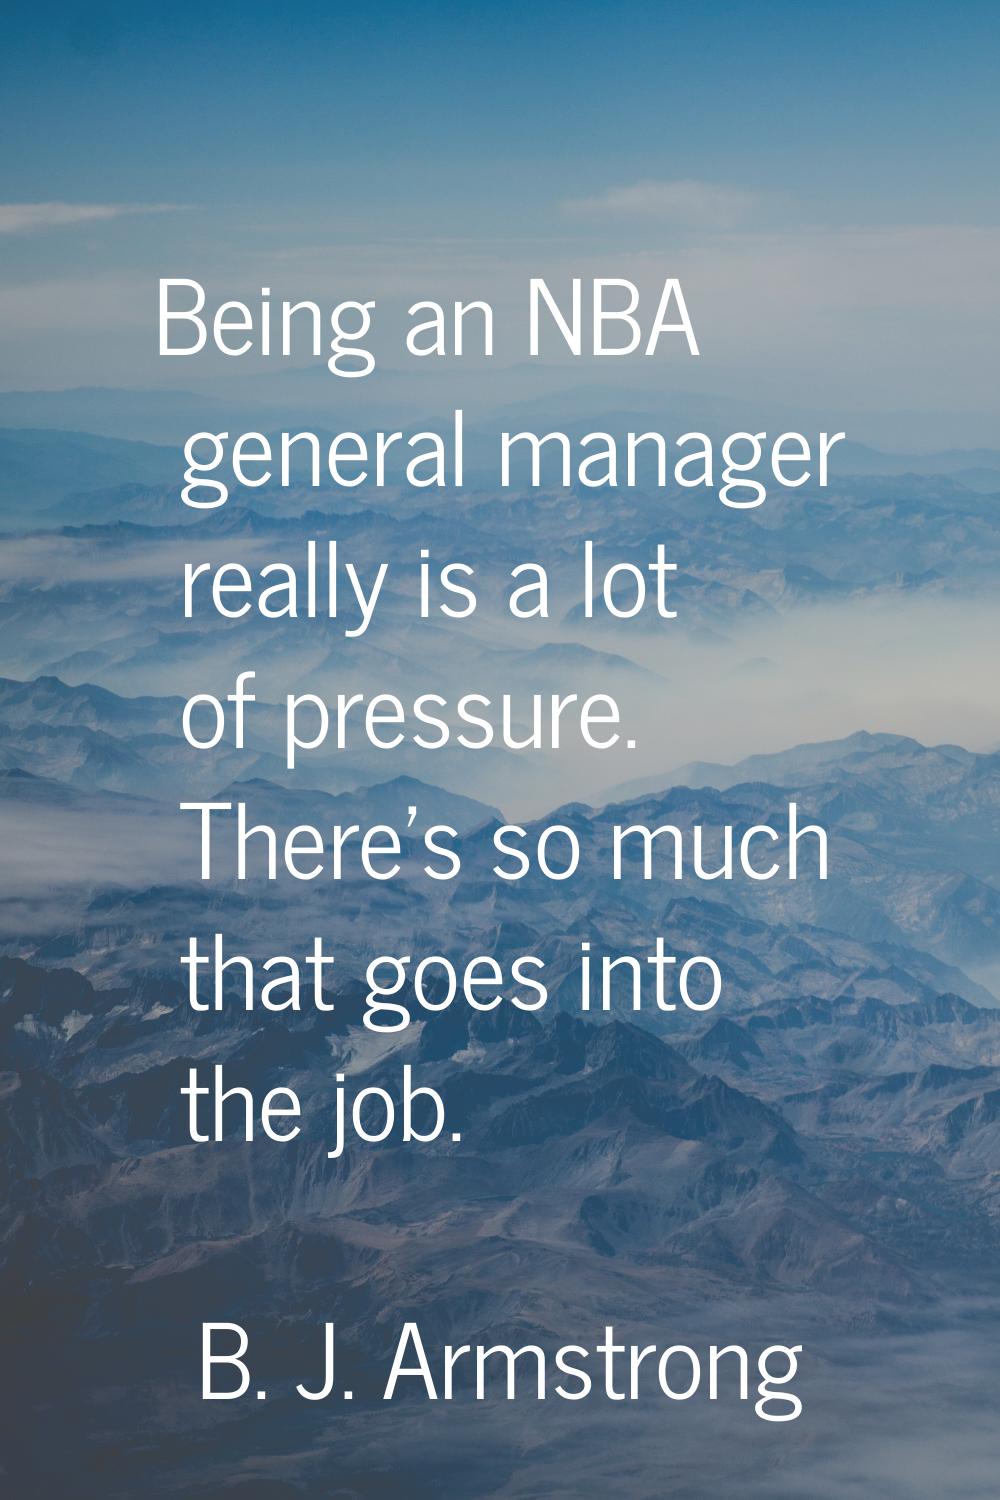 Being an NBA general manager really is a lot of pressure. There's so much that goes into the job.